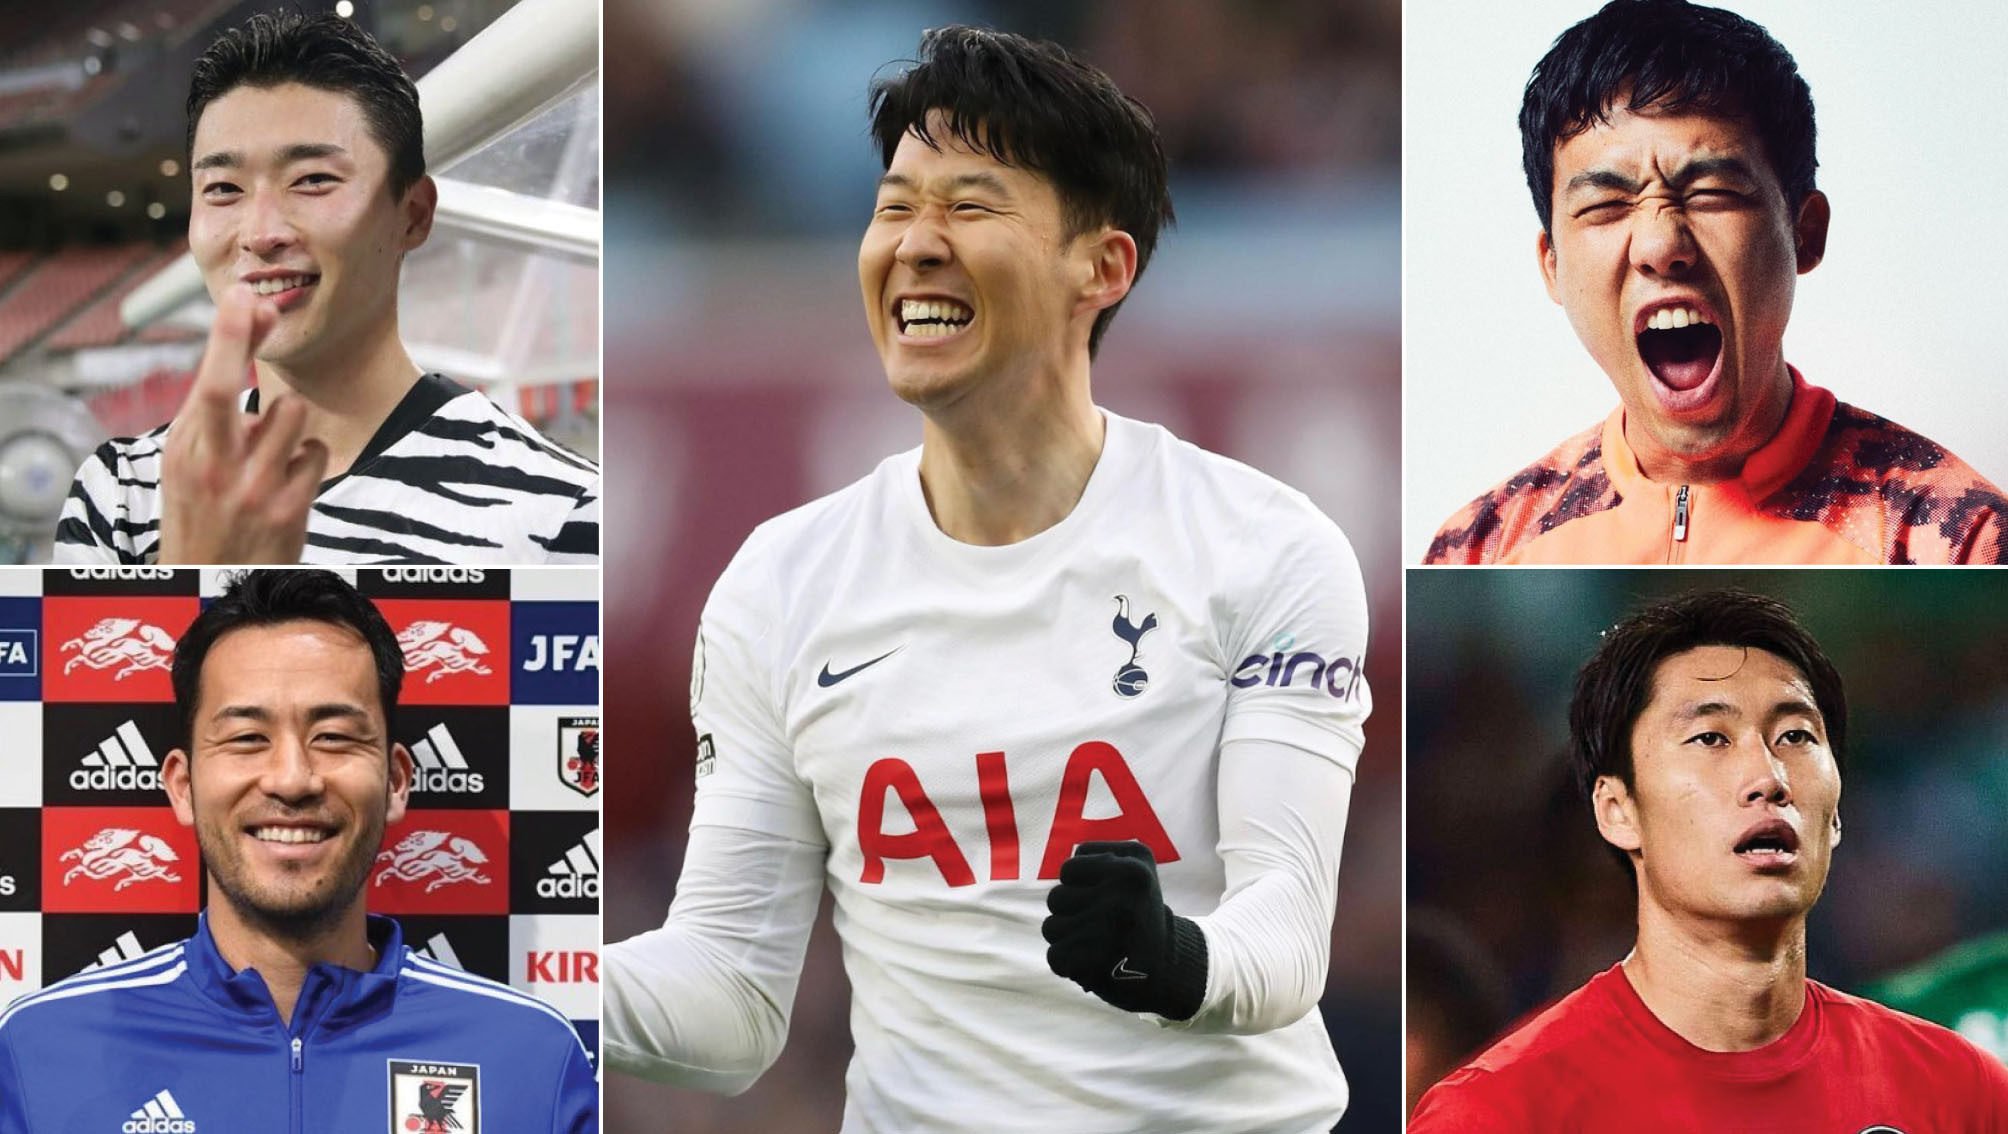 Asian football stars including Son Heung-min and Maya Yoshida have led their countries to some surprising victories during the Qatar 2022 World Cup. Photos: Instagram